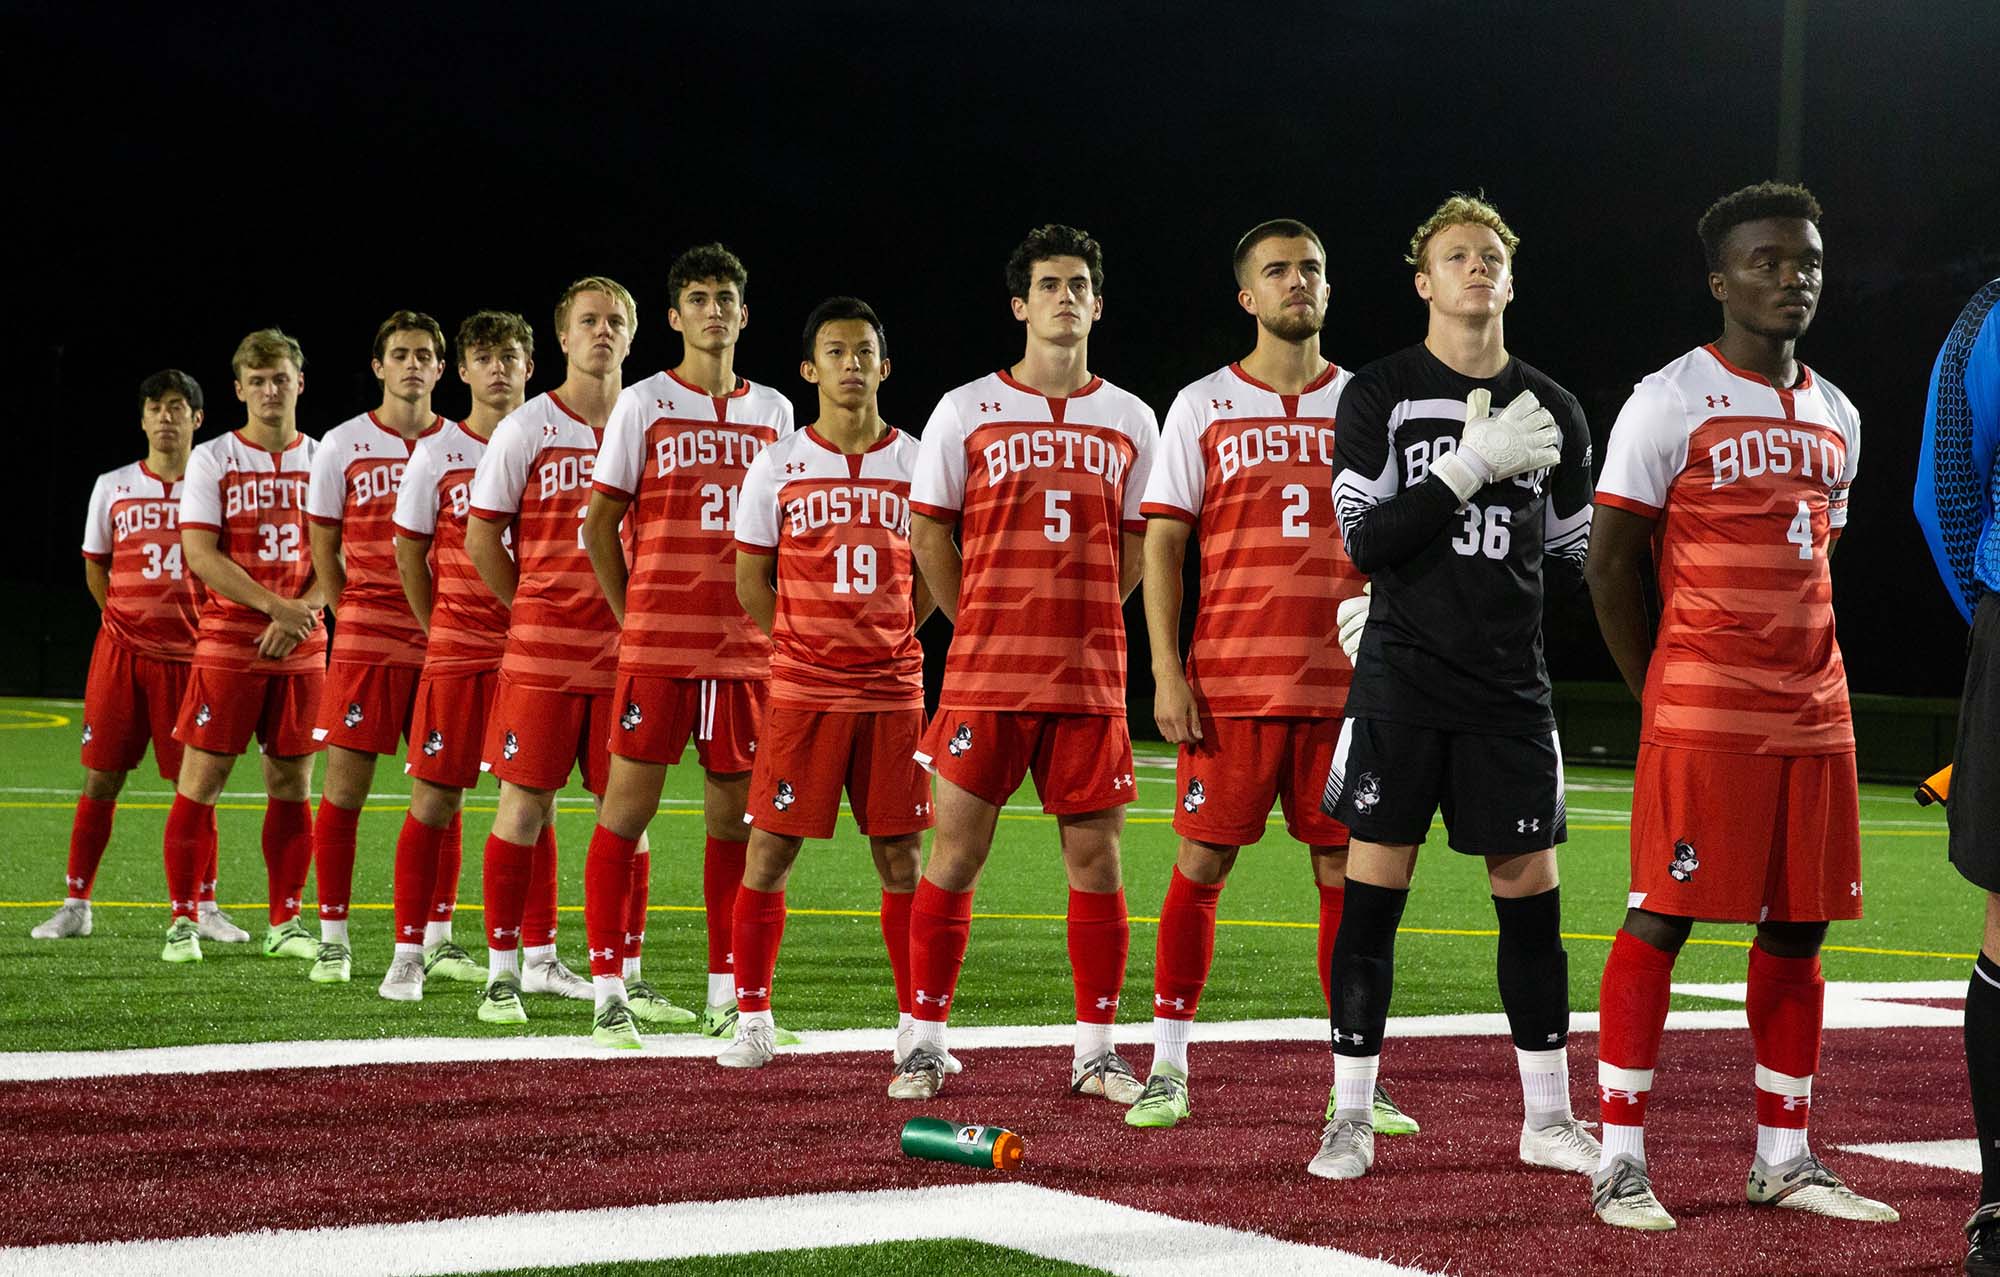 Photo of Kargbo (far right) with his teammates on the field during a fall 2021 game.  They all stand in a line wearing red and white soccer uniforms that read "Boston" as well as their player numbers. The goalie stands at the front in a black and white version of the same uniform.